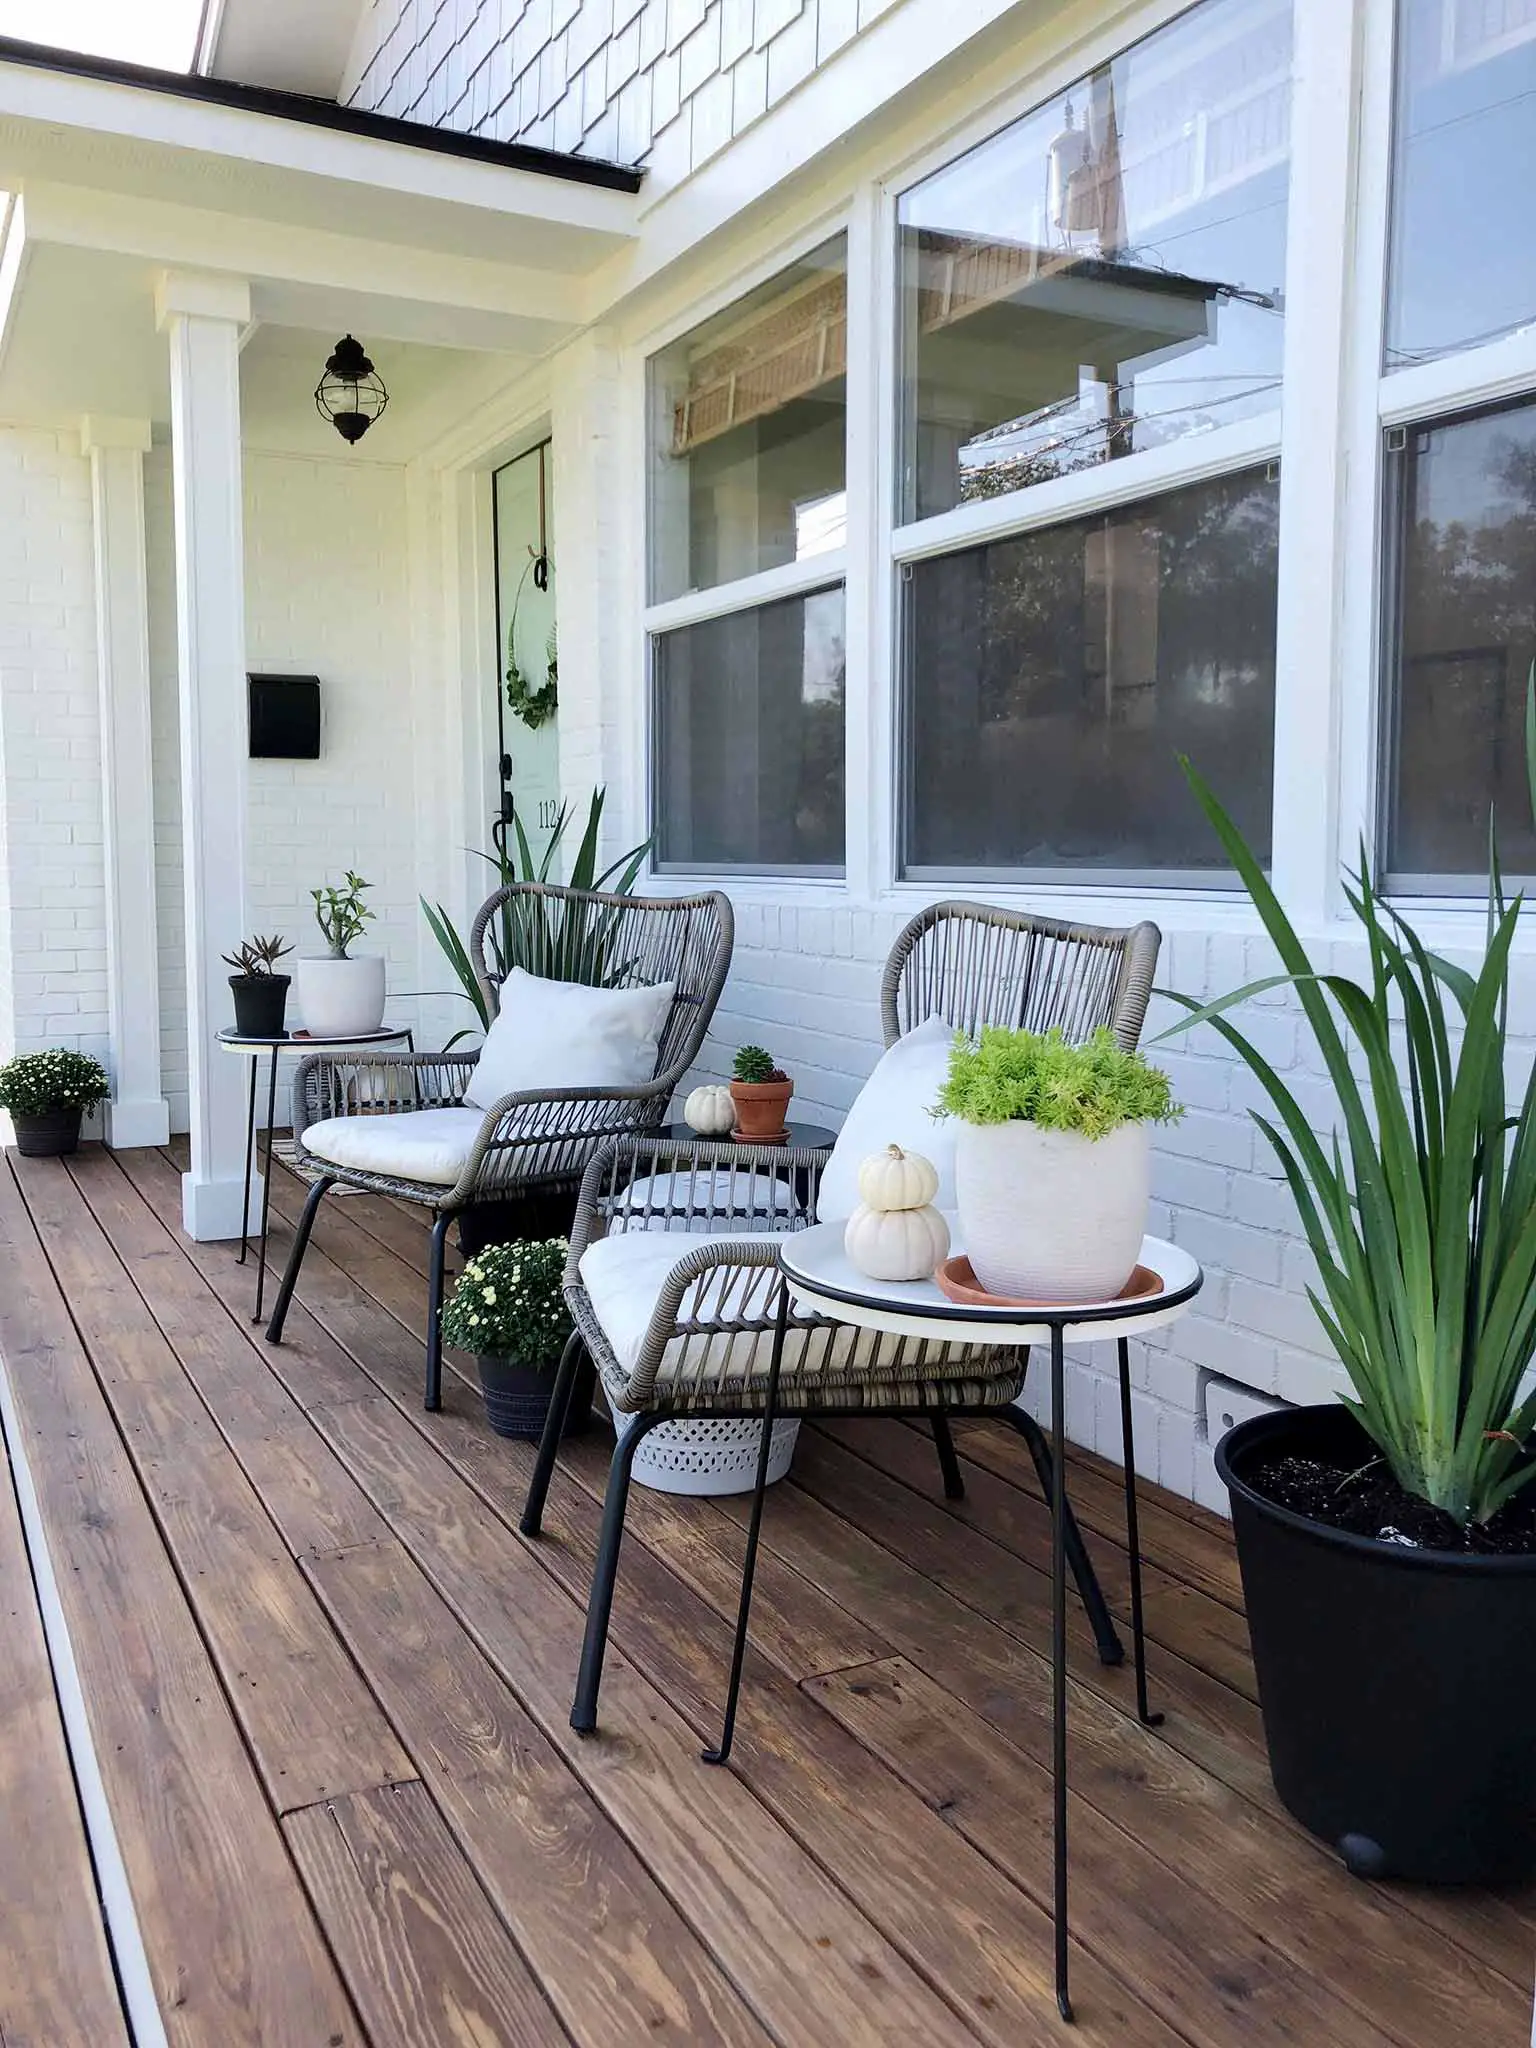 Iris planters and succulents - Front porch fall makeover reveal - That Homebird Life Blog